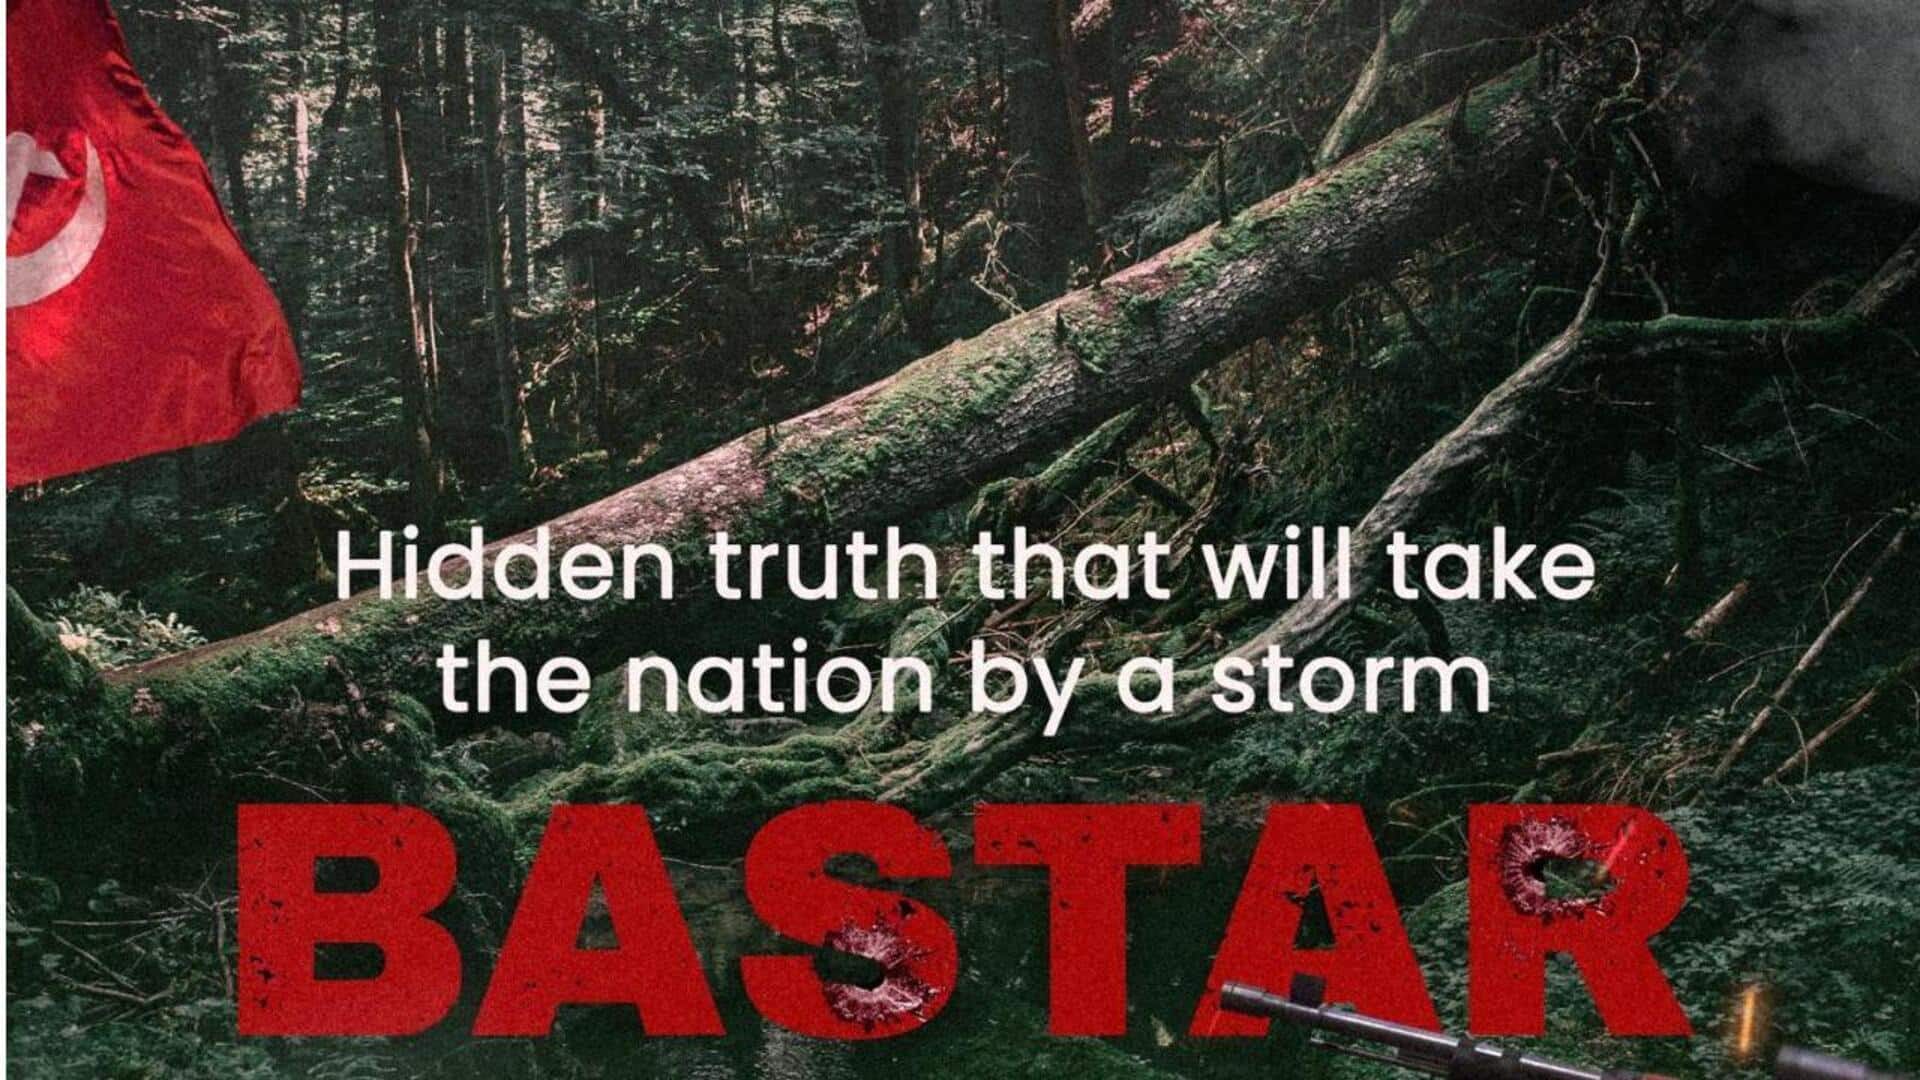 'The Kerala Story' makers announce another true-incident-based title, 'Bastar'